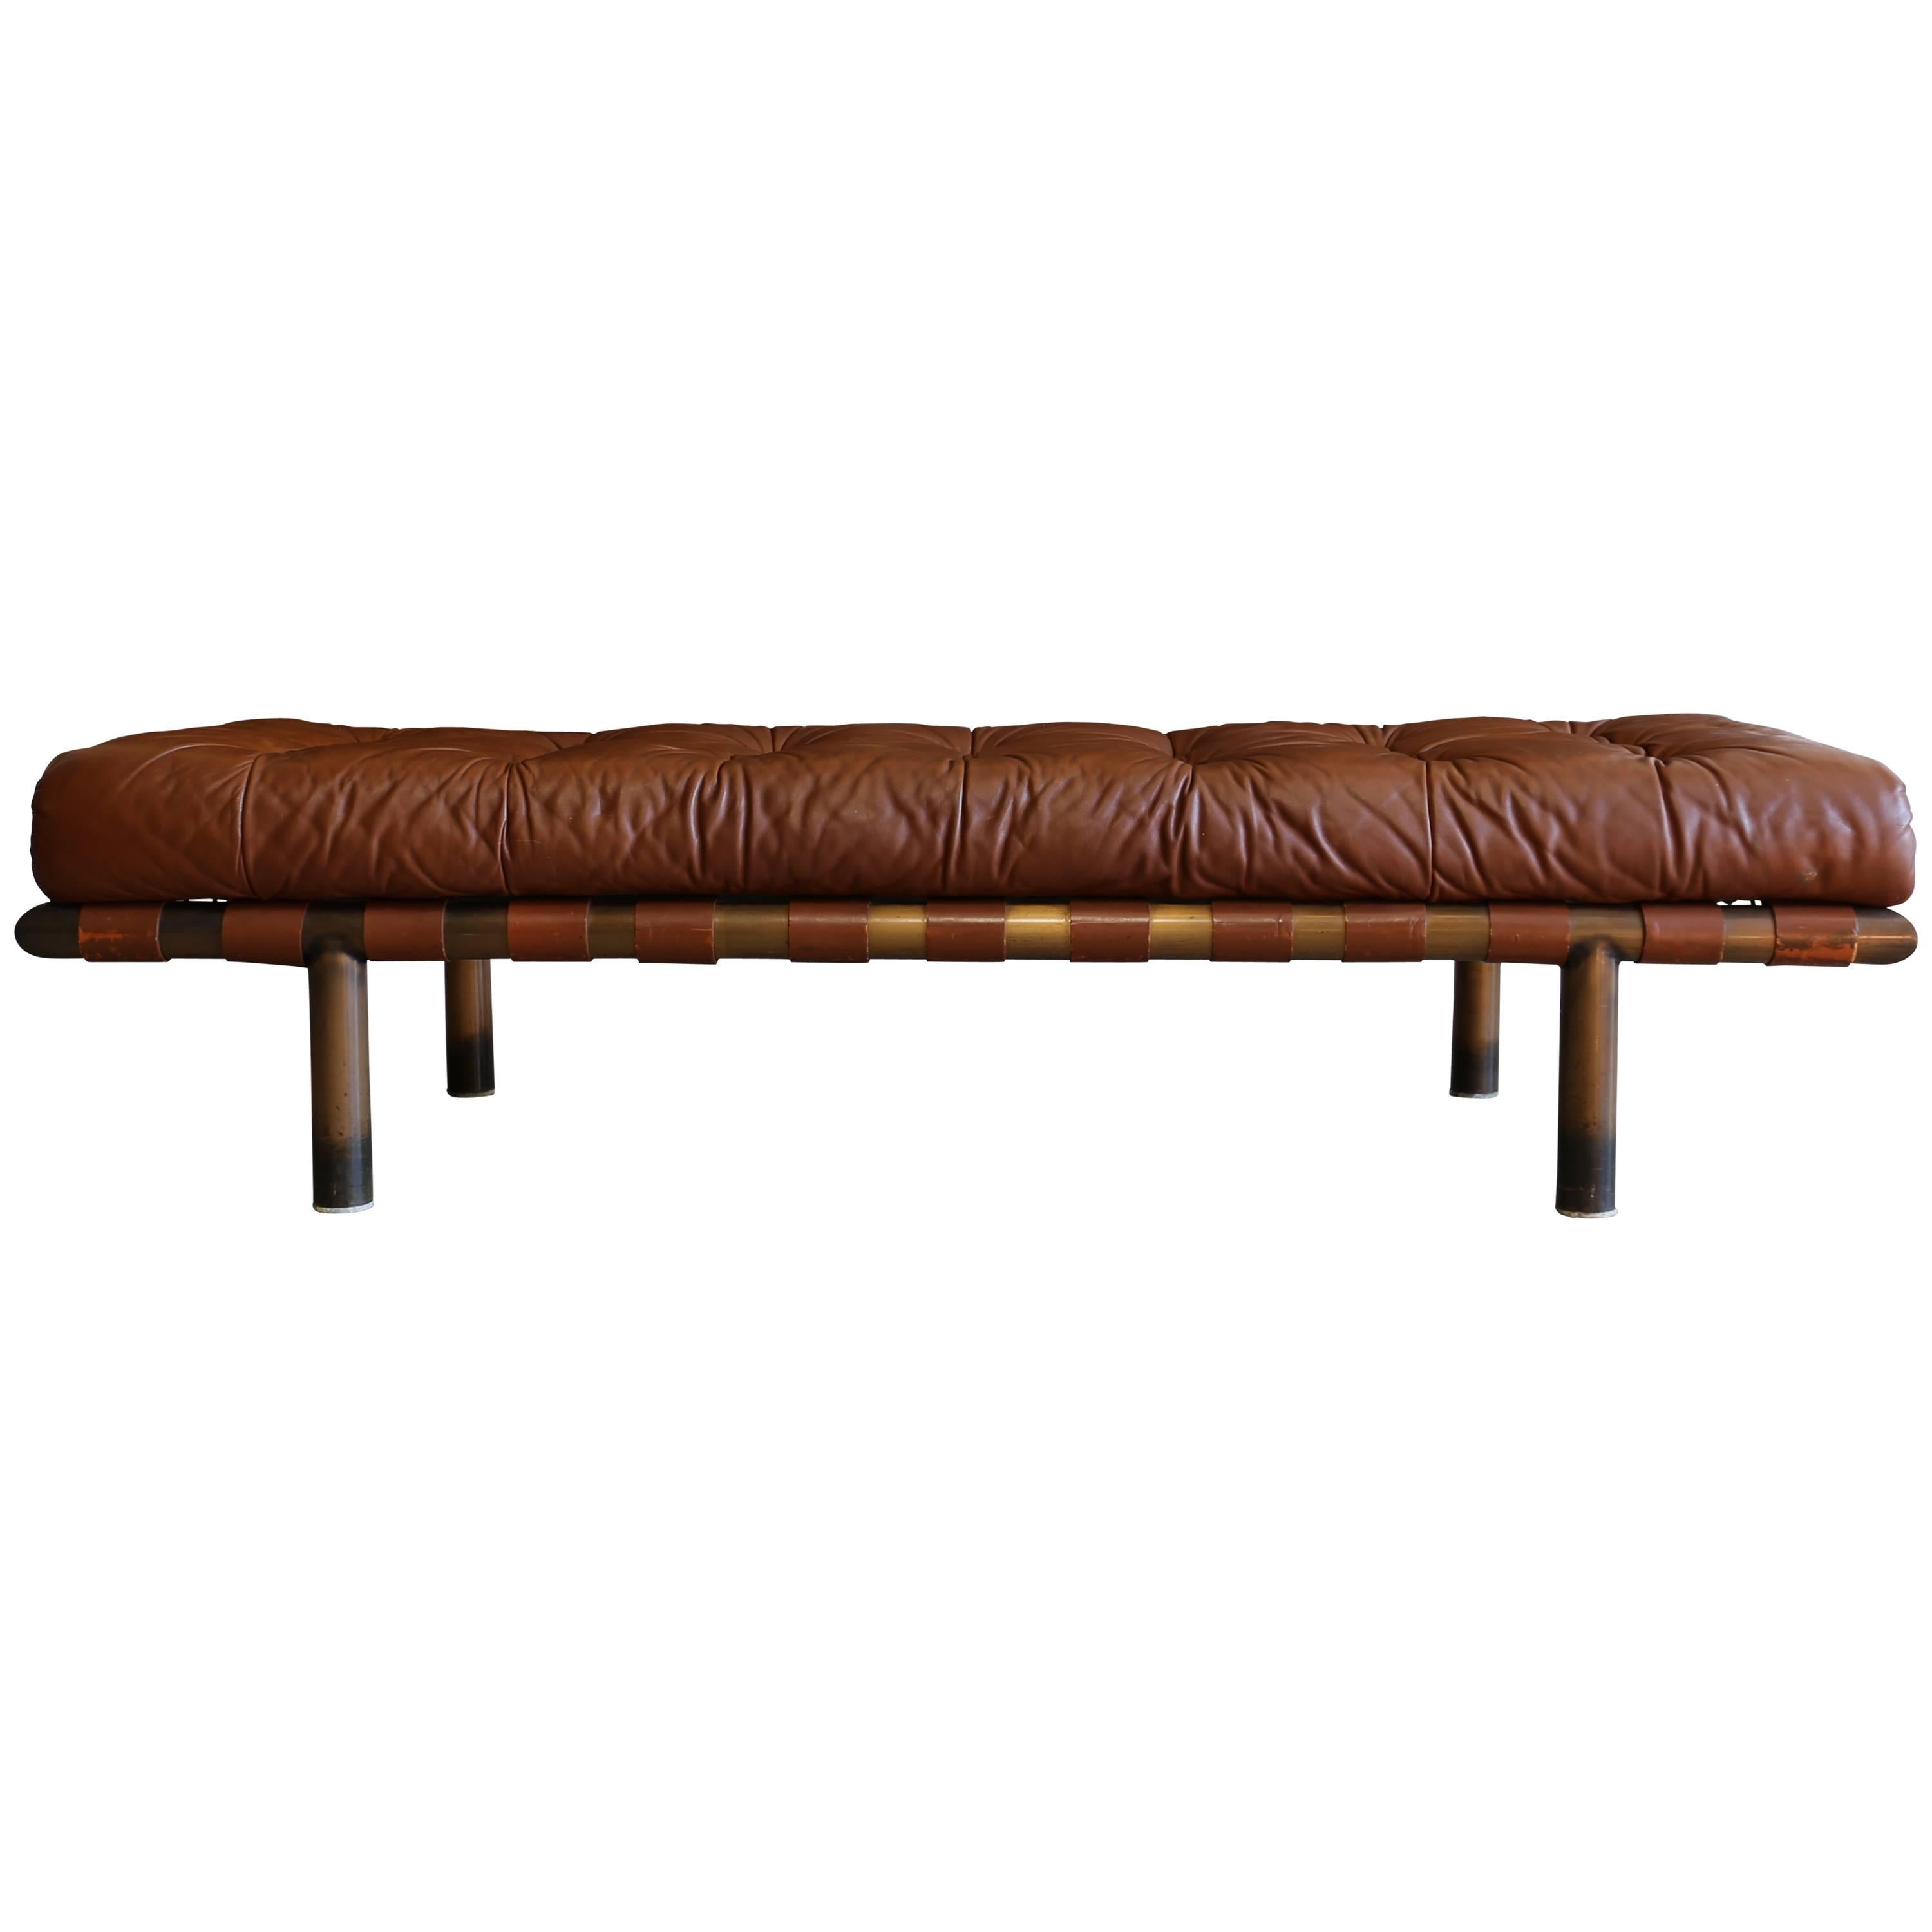 Brass and Tufted Leather Bench